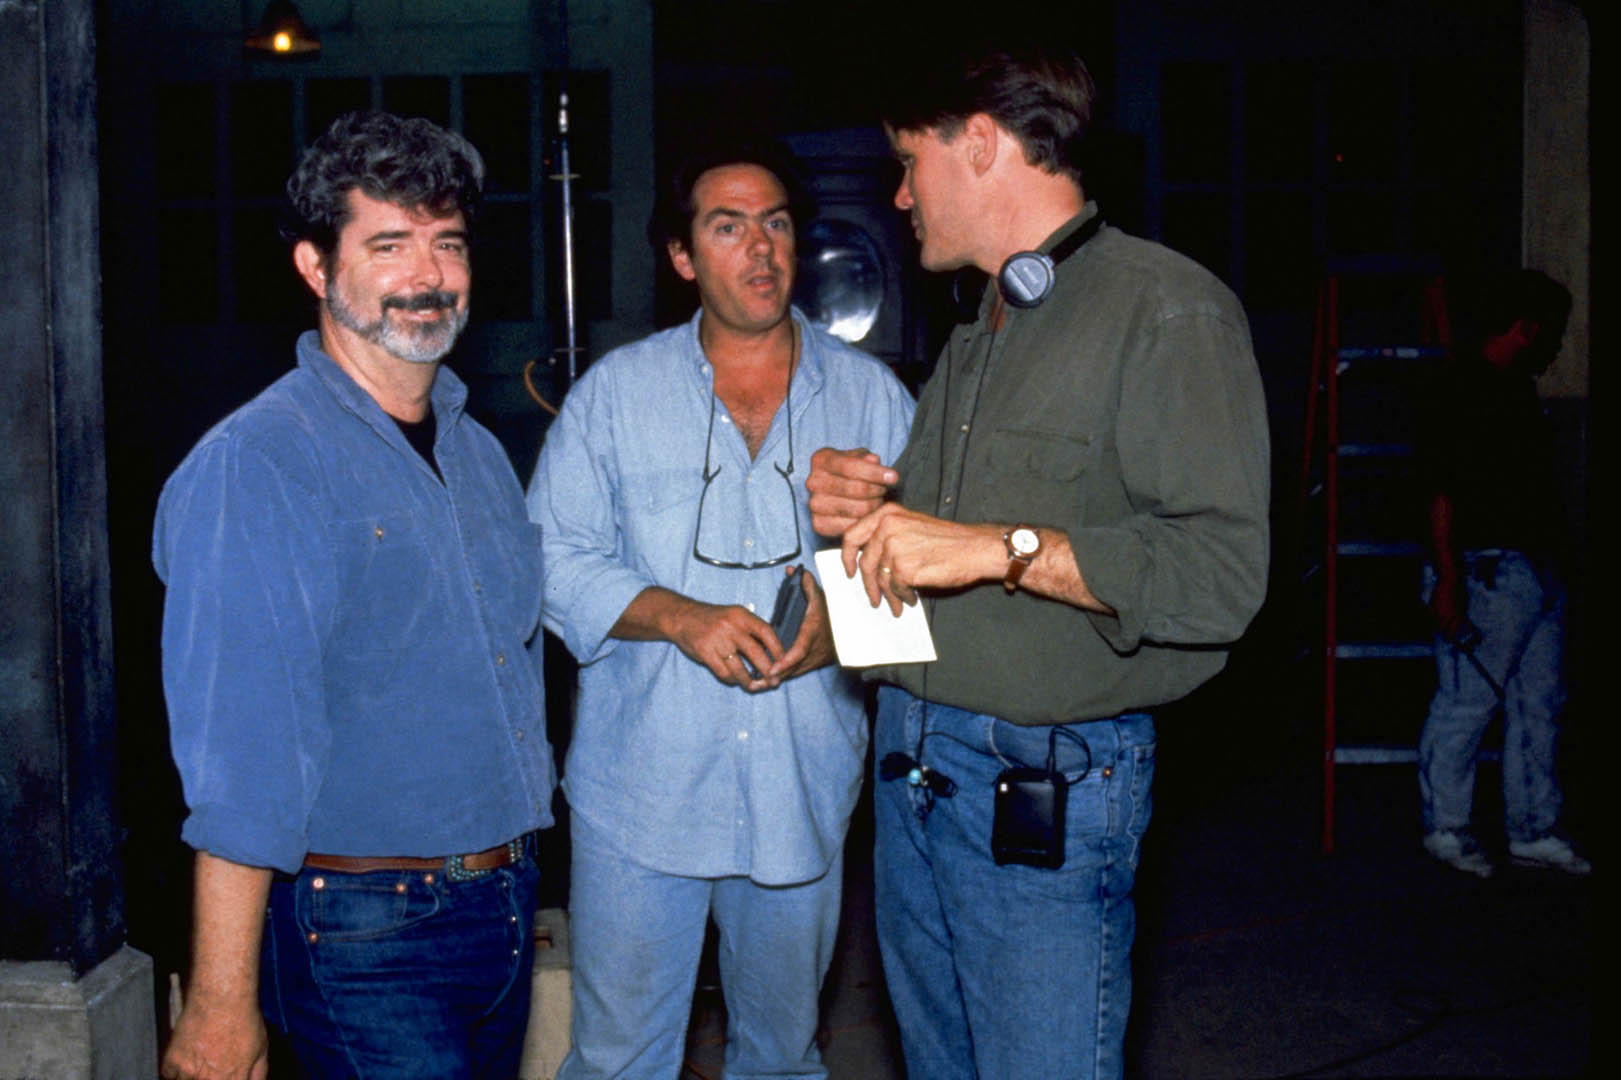 Joe Johnston and George Lucas behind the scenes of The Adventures of Young Indiana Jones